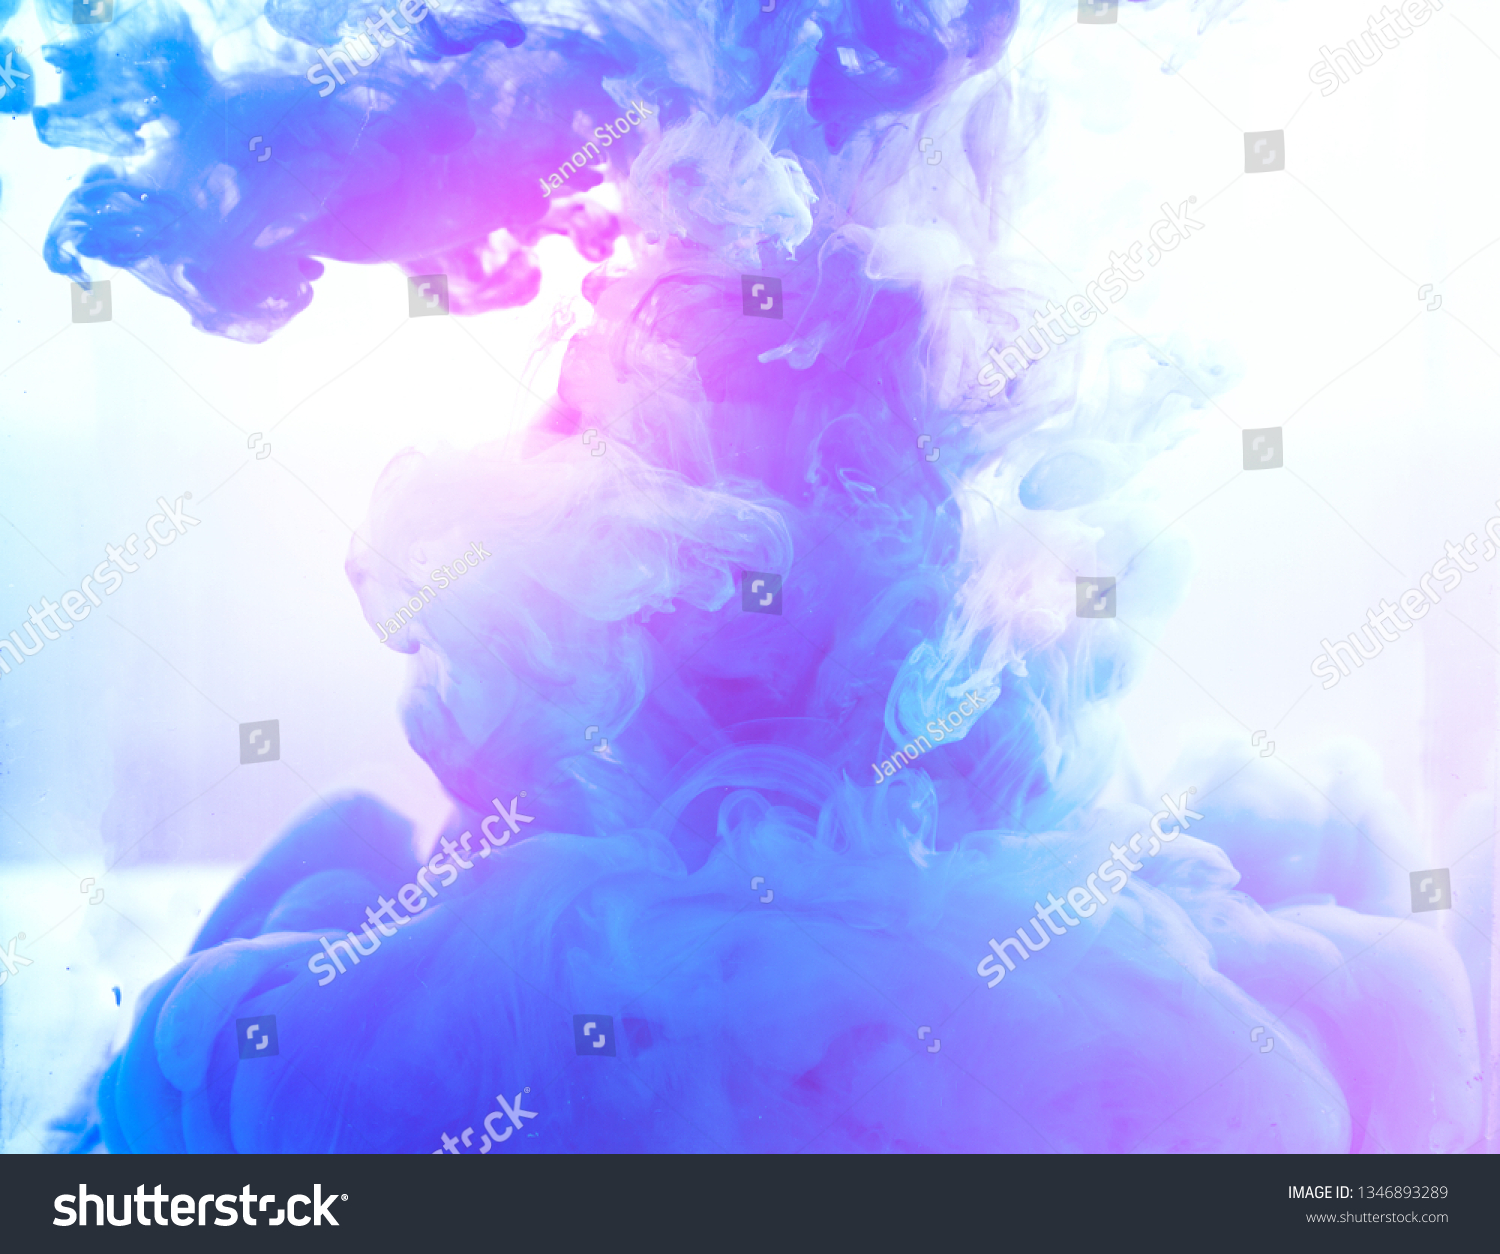 blue smoke color Motion drop in water swirling Colorful ink abstraction.Fancy Dream Cloud of ink background
 #1346893289